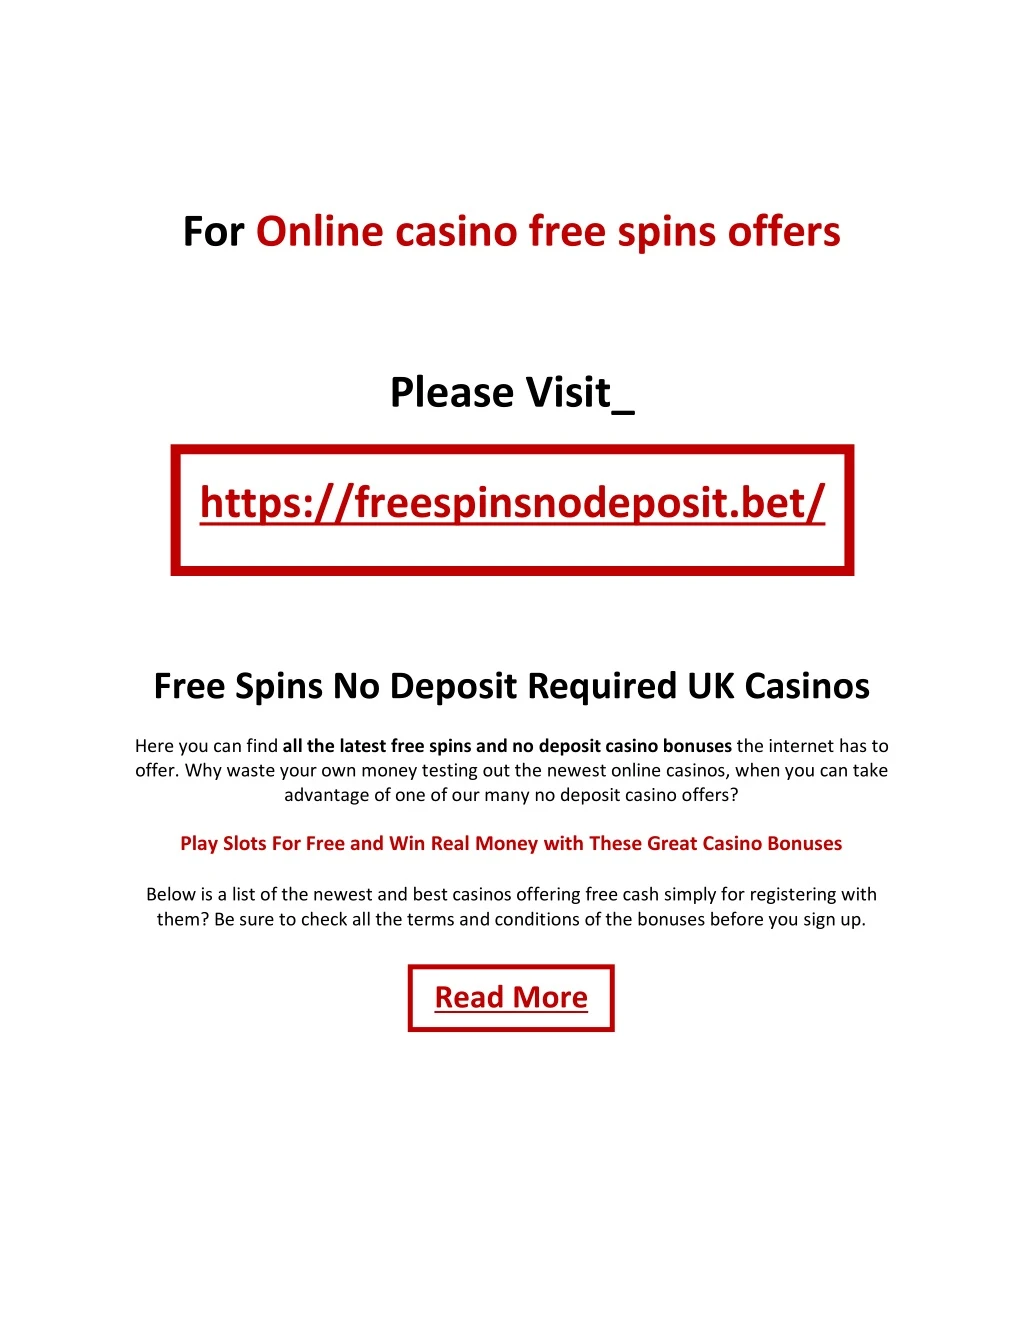 for online casino free spins offers